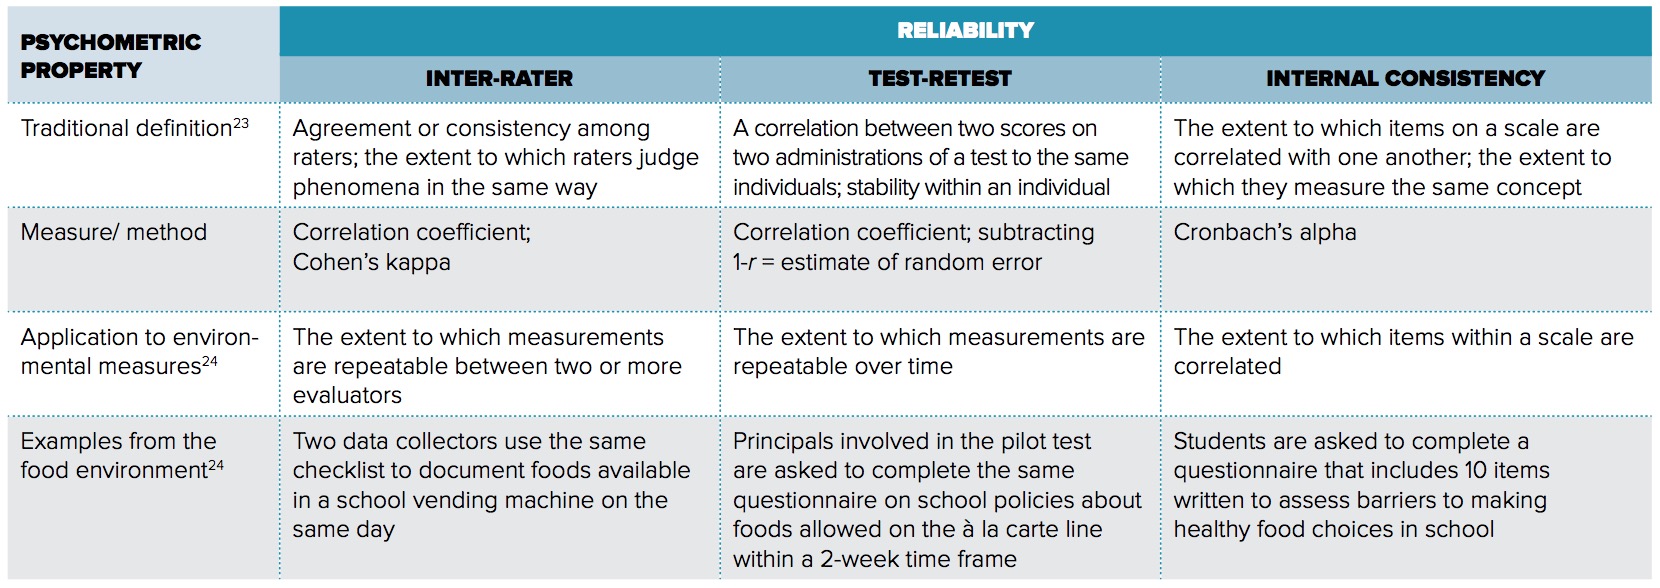 Table 2: Reliability Definitions, Measures, Applications to, and Examples from Food Environment Measurement